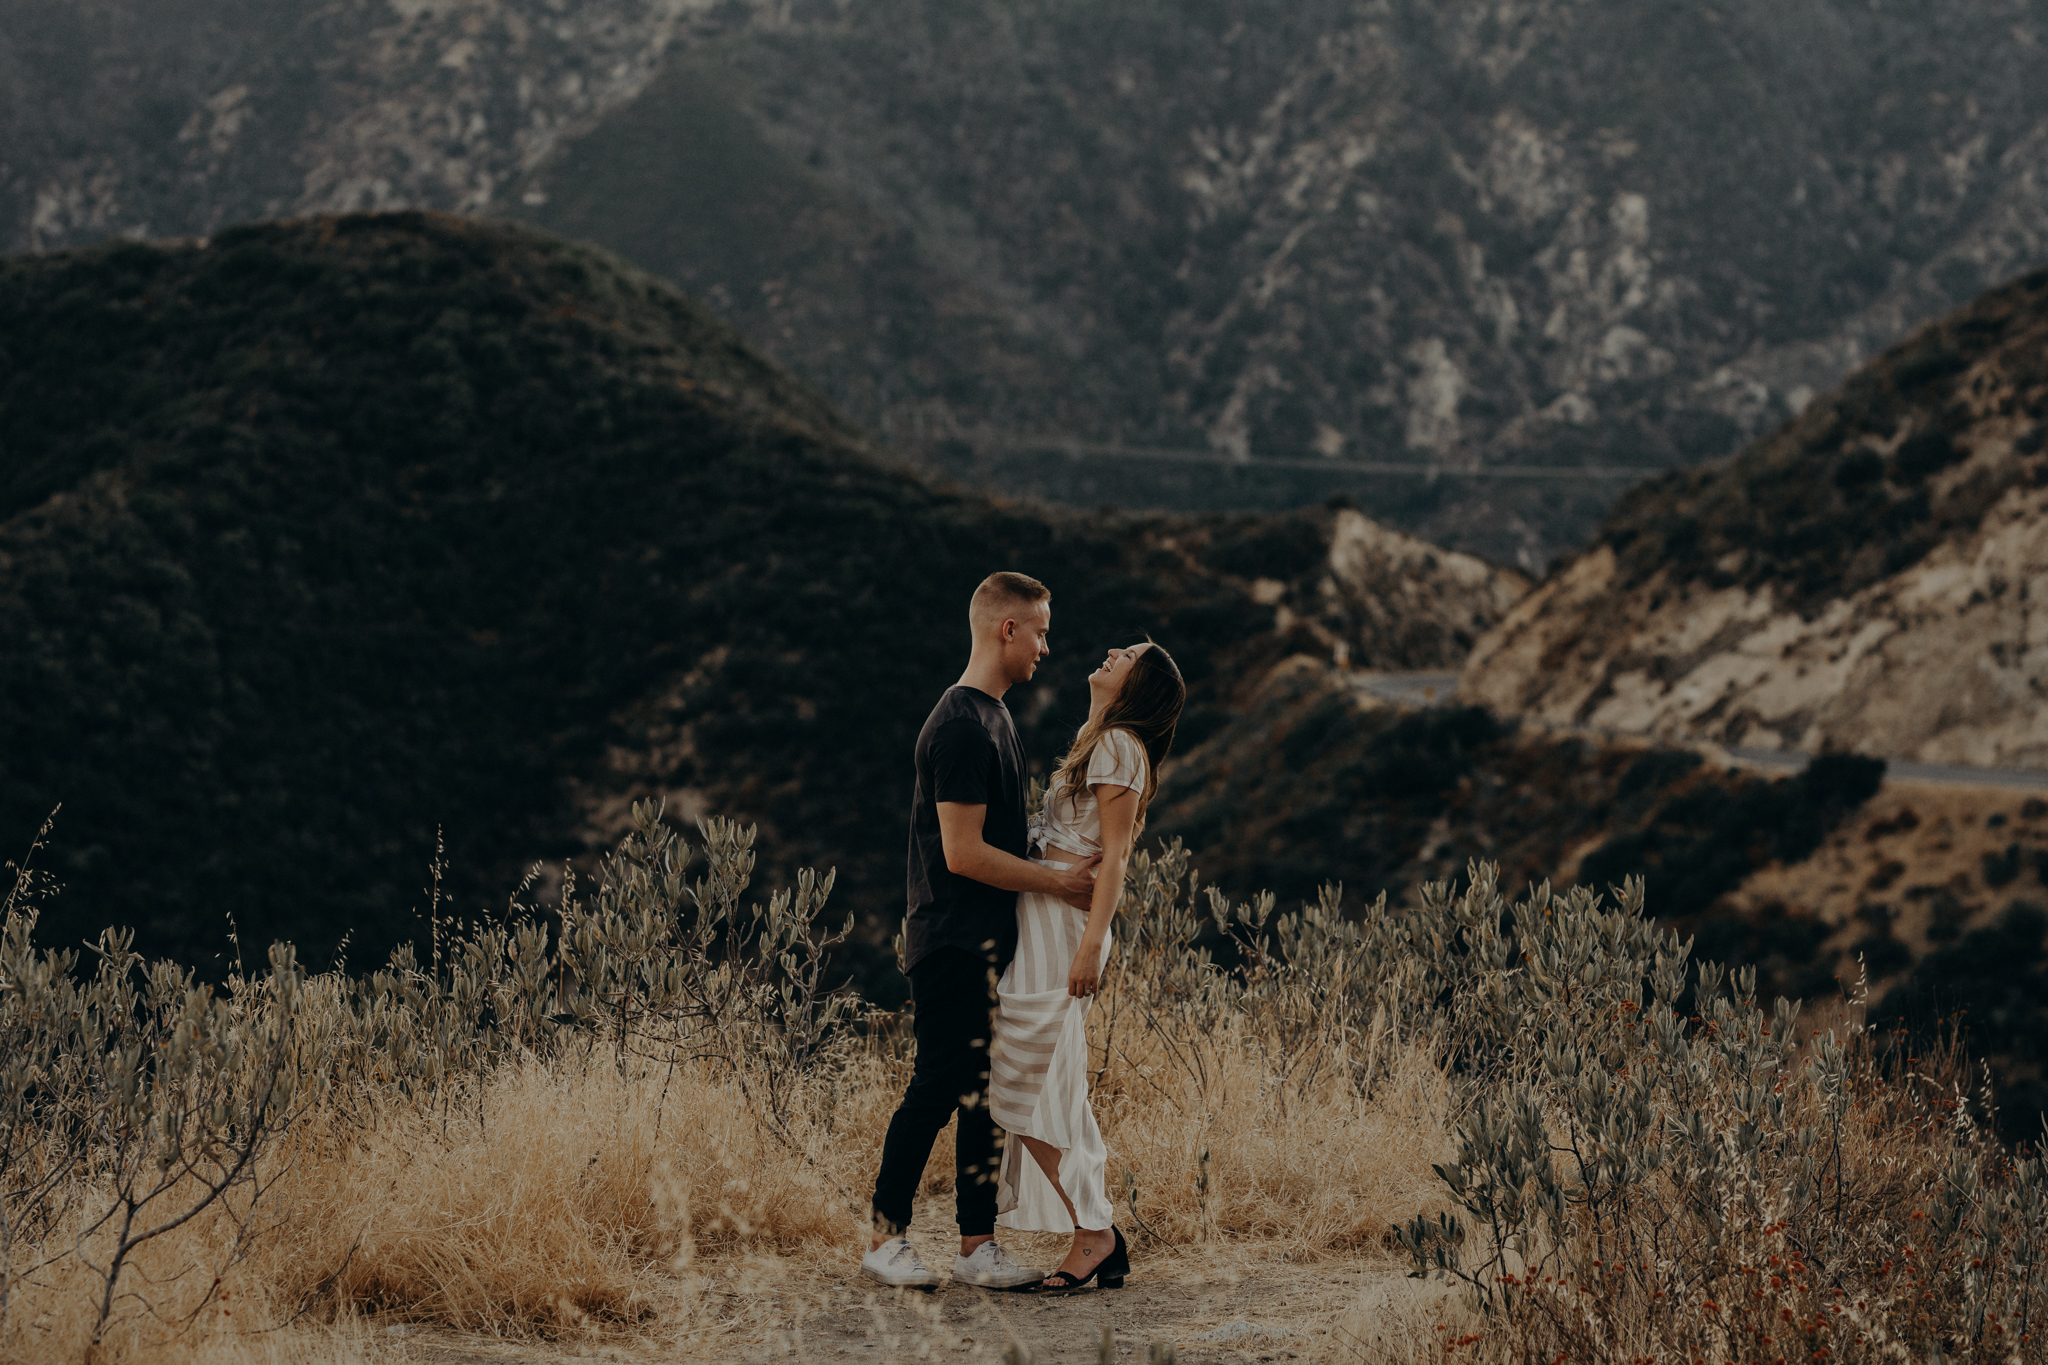 Isaiah + Taylor Photography - Los Angeles Forest Engagement Session - Laid back wedding photographer-020.jpg